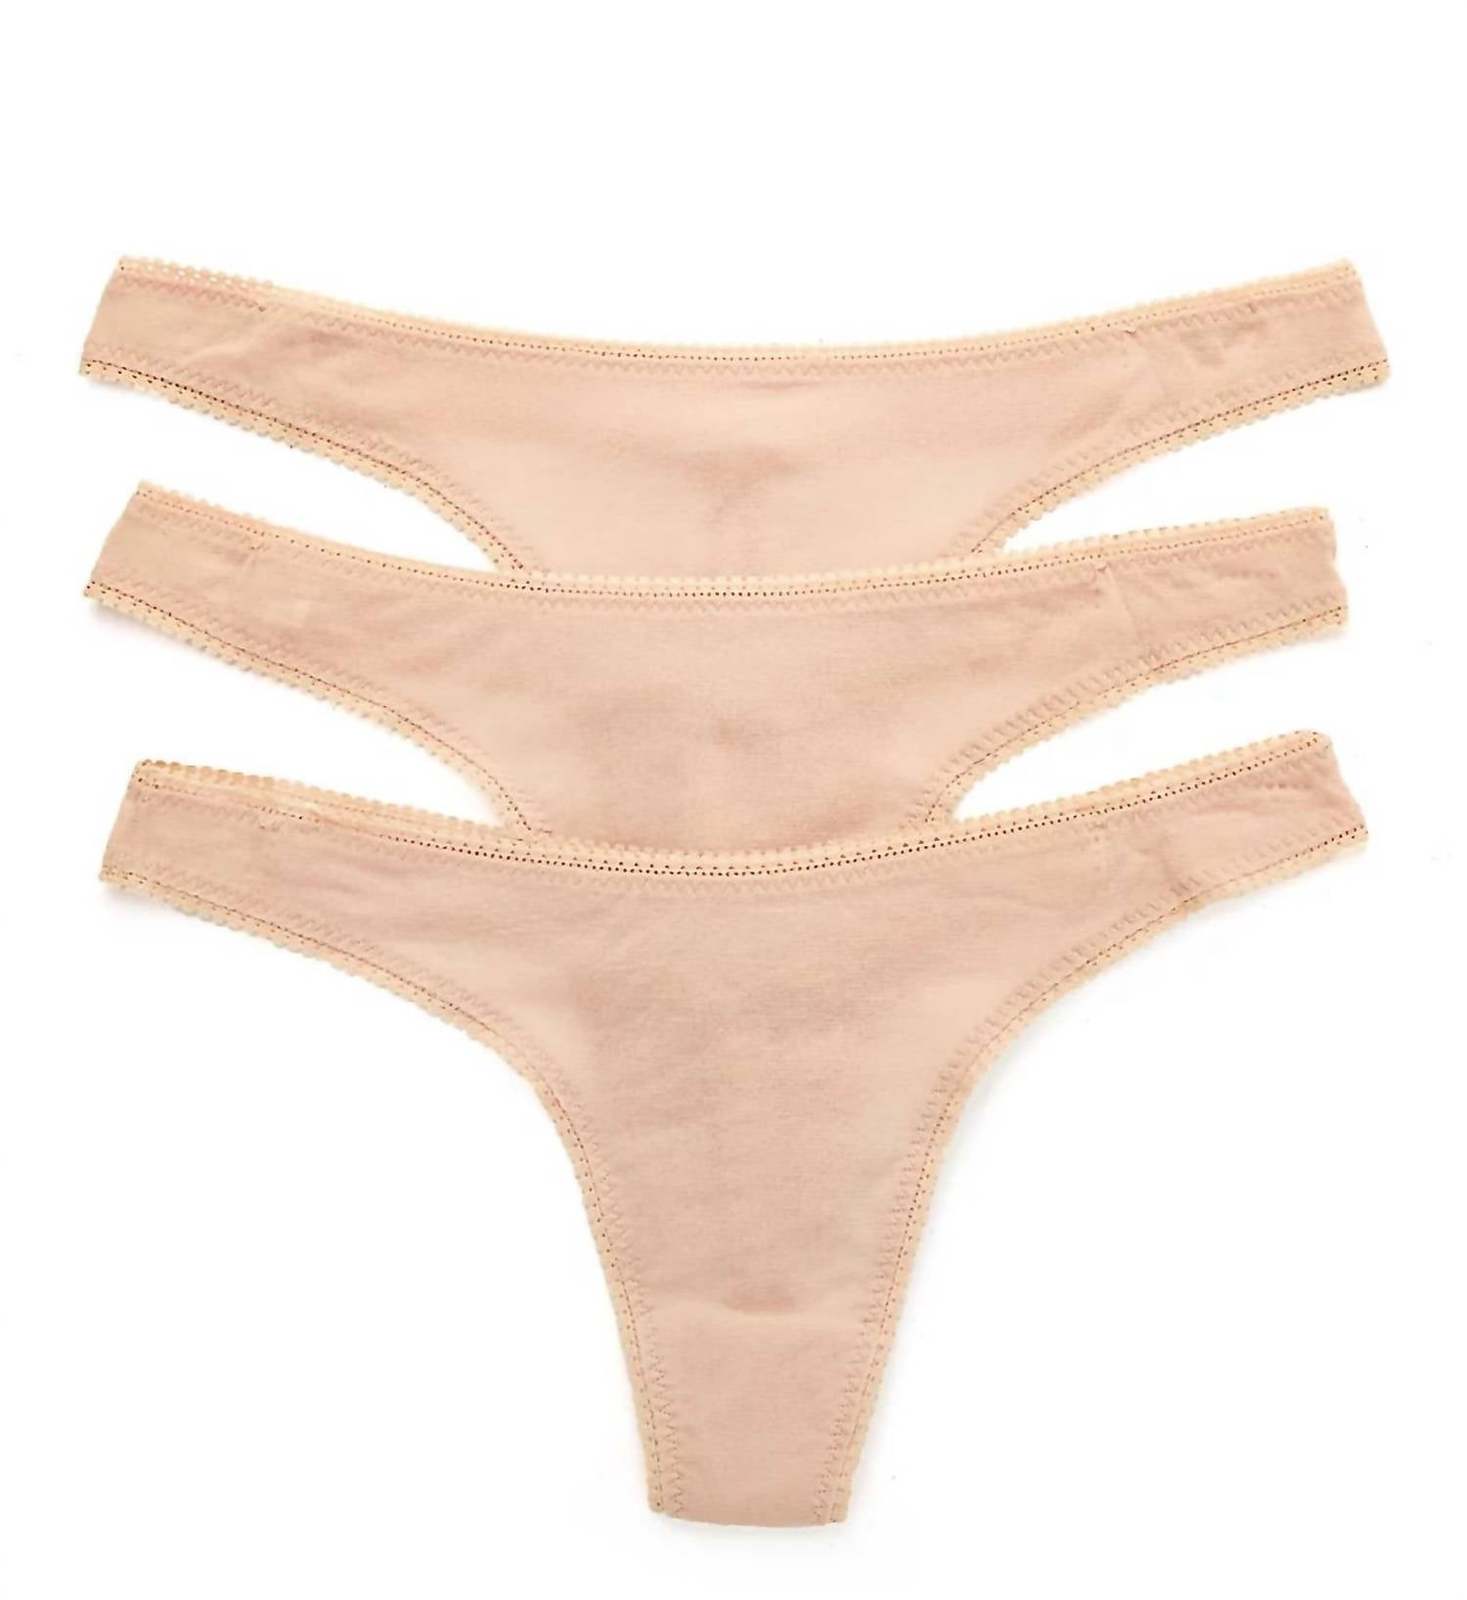 Primary image for Women's Mesh Hip G Thong 3-Pack